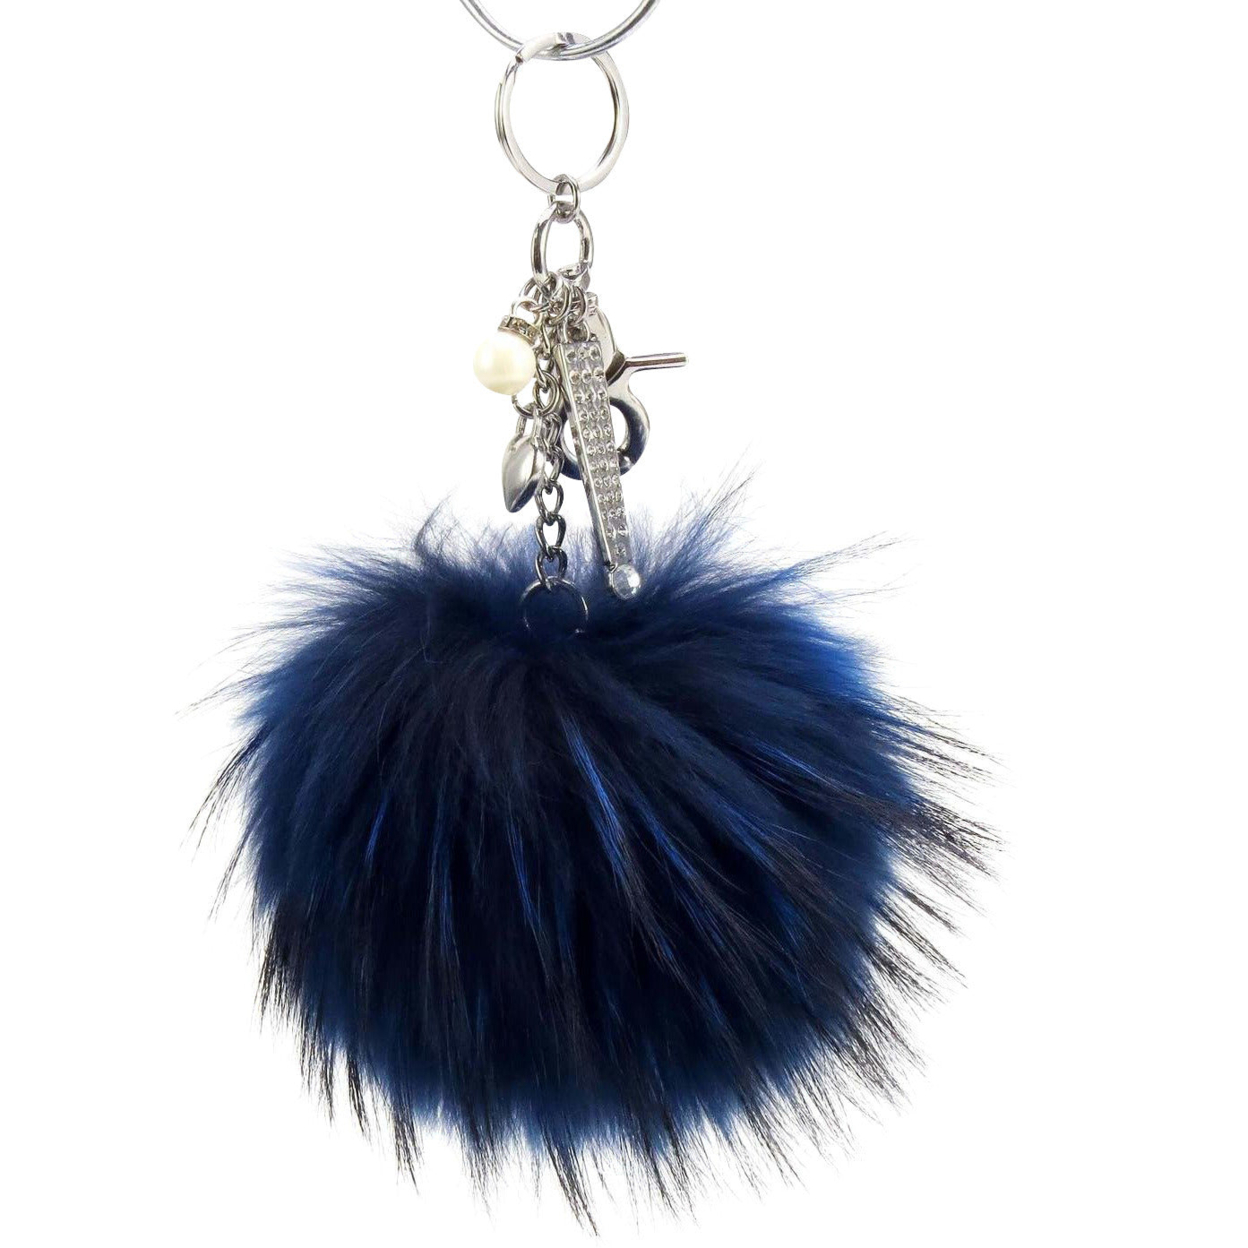 Real Fur Puff Ball Pom-Pom 6 Accessory Dangle Purse Charm - Royal Blue With Silver Hardware